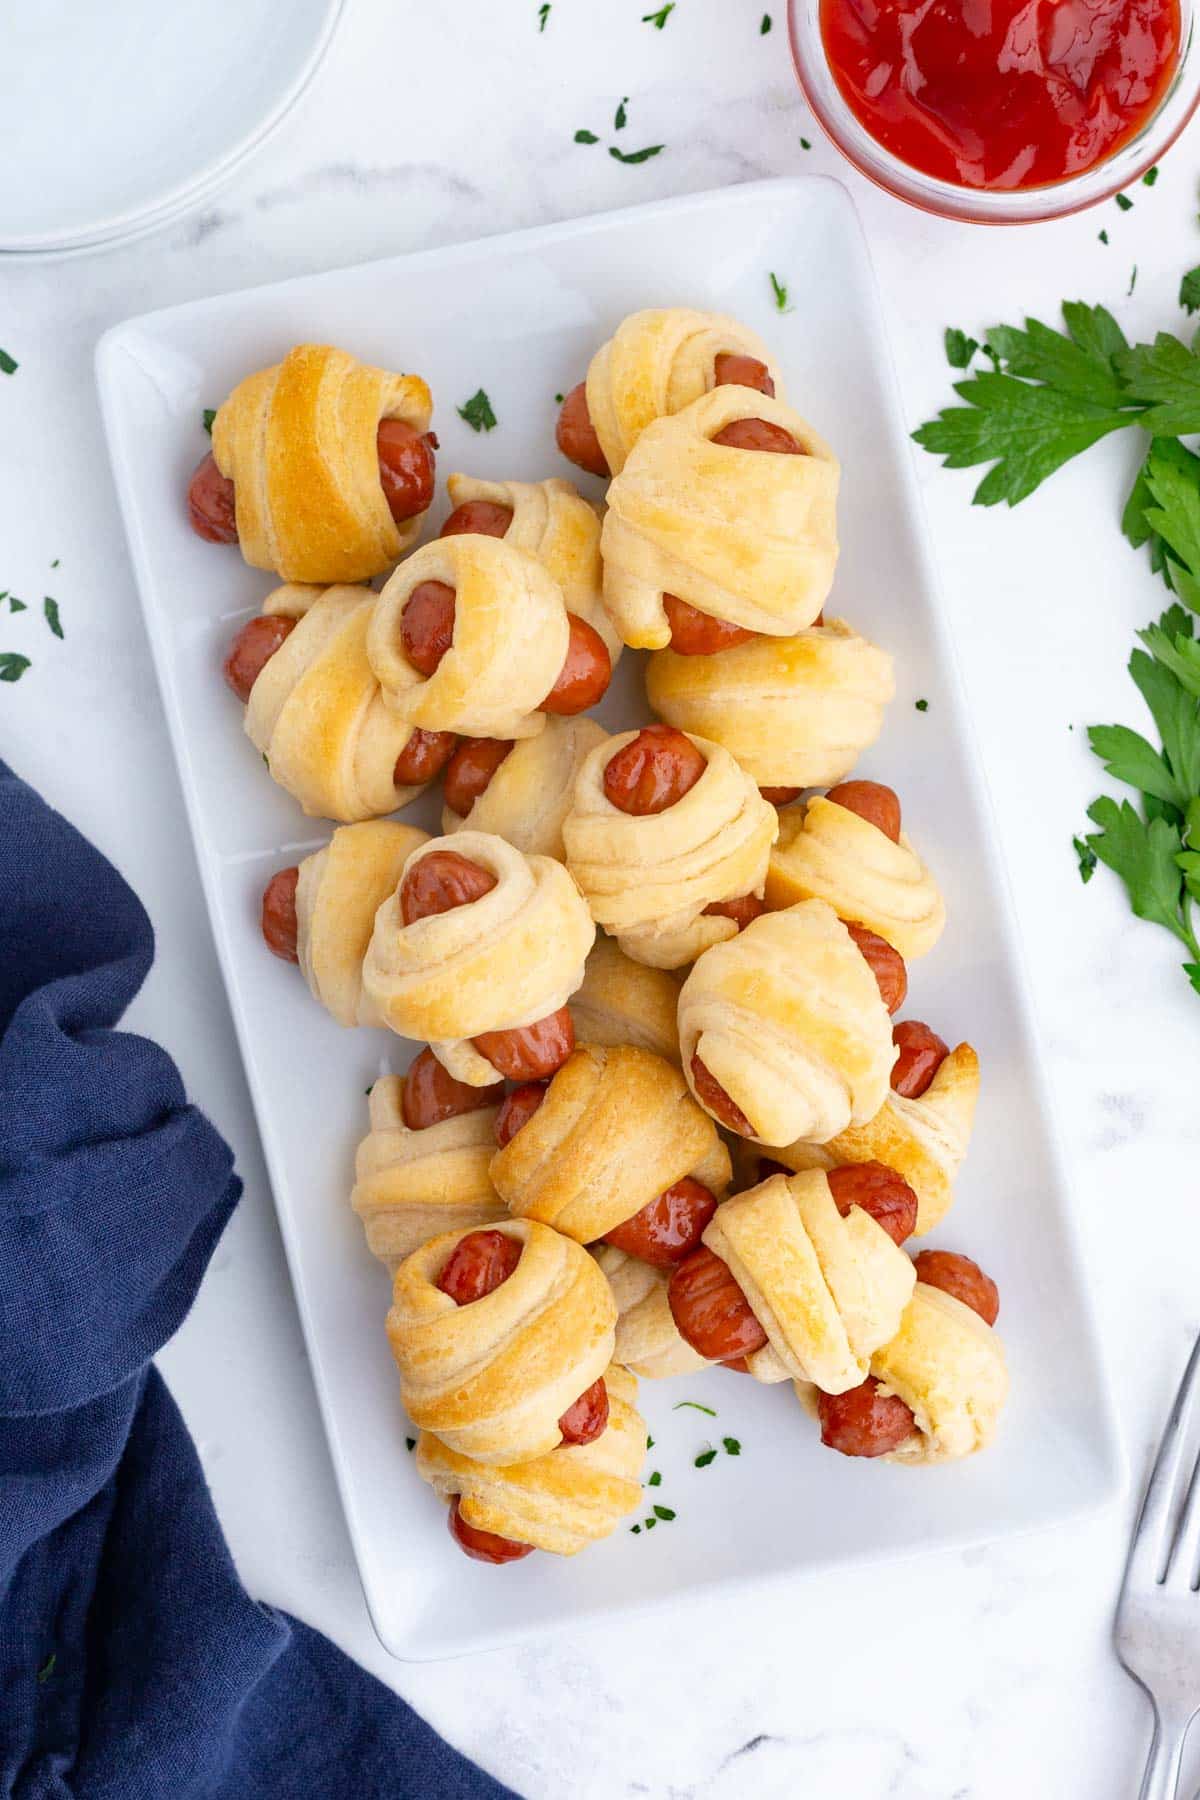 A long, rectangular plate with pigs in a blanket is served for breakfast.